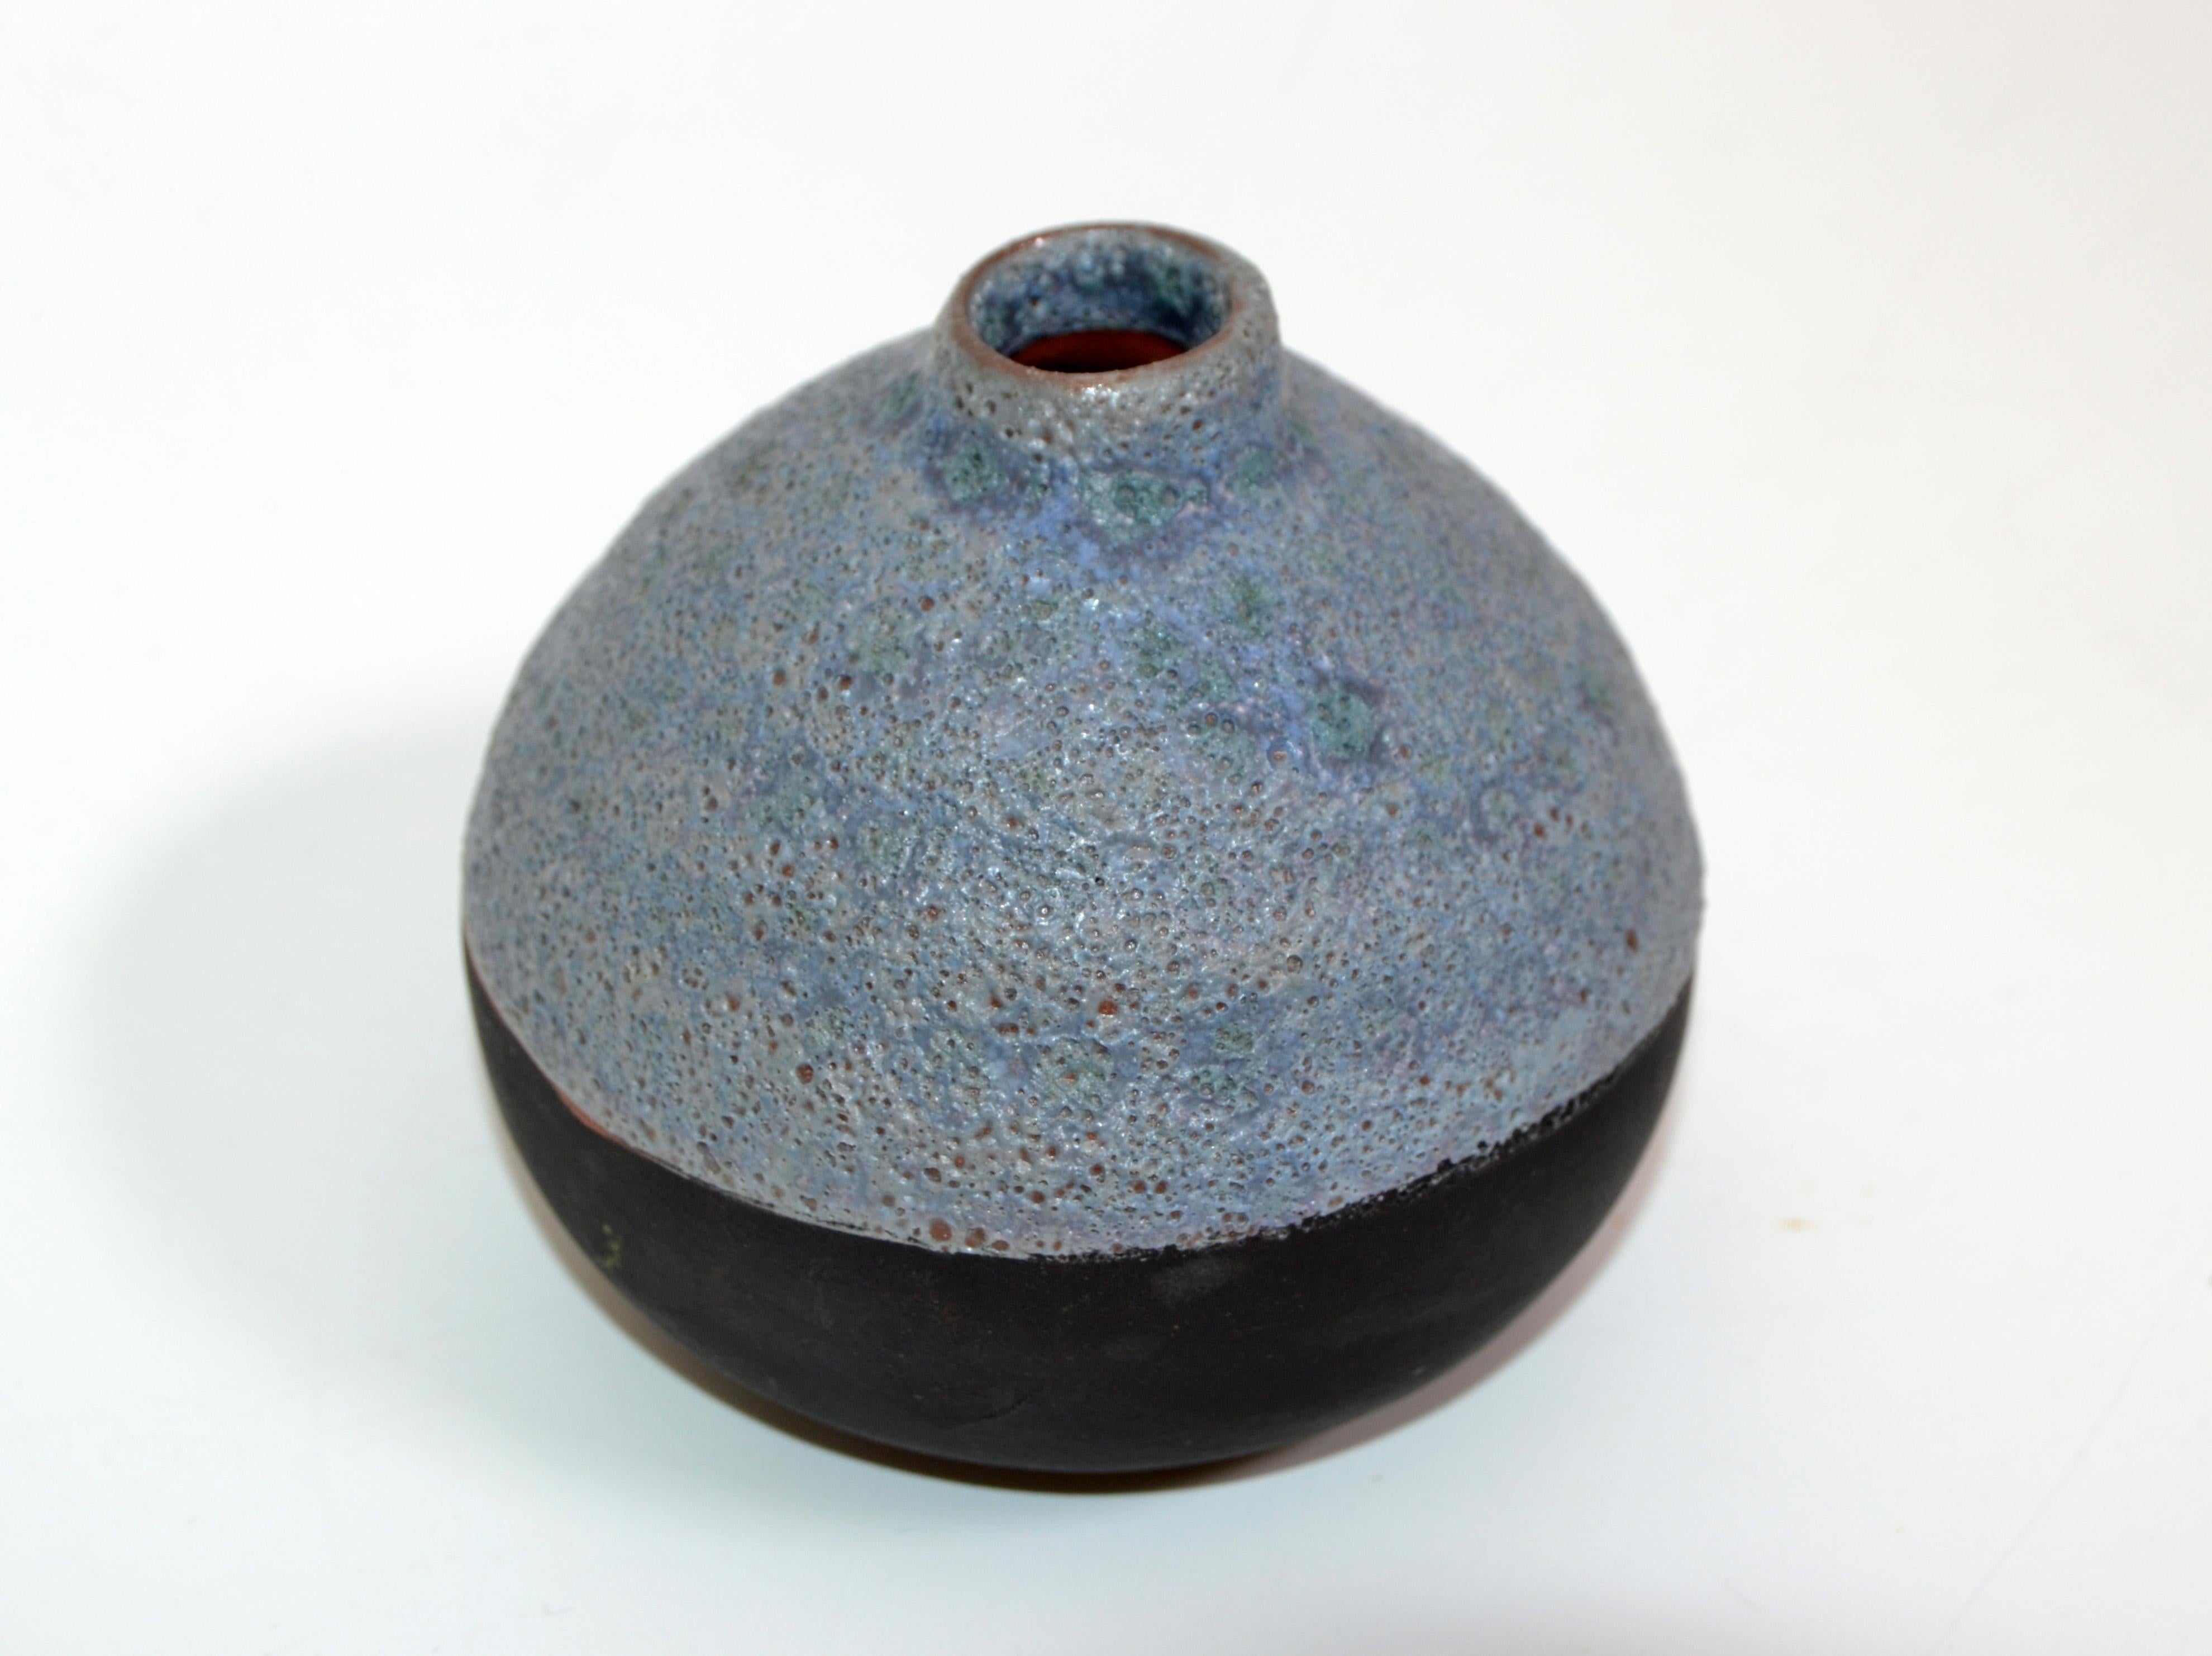 Round American Raku Mid-Century Modern inside glazed handcrafted blue and black vase, or vessel.
The Studio Art Pottery is two textured vase.

 